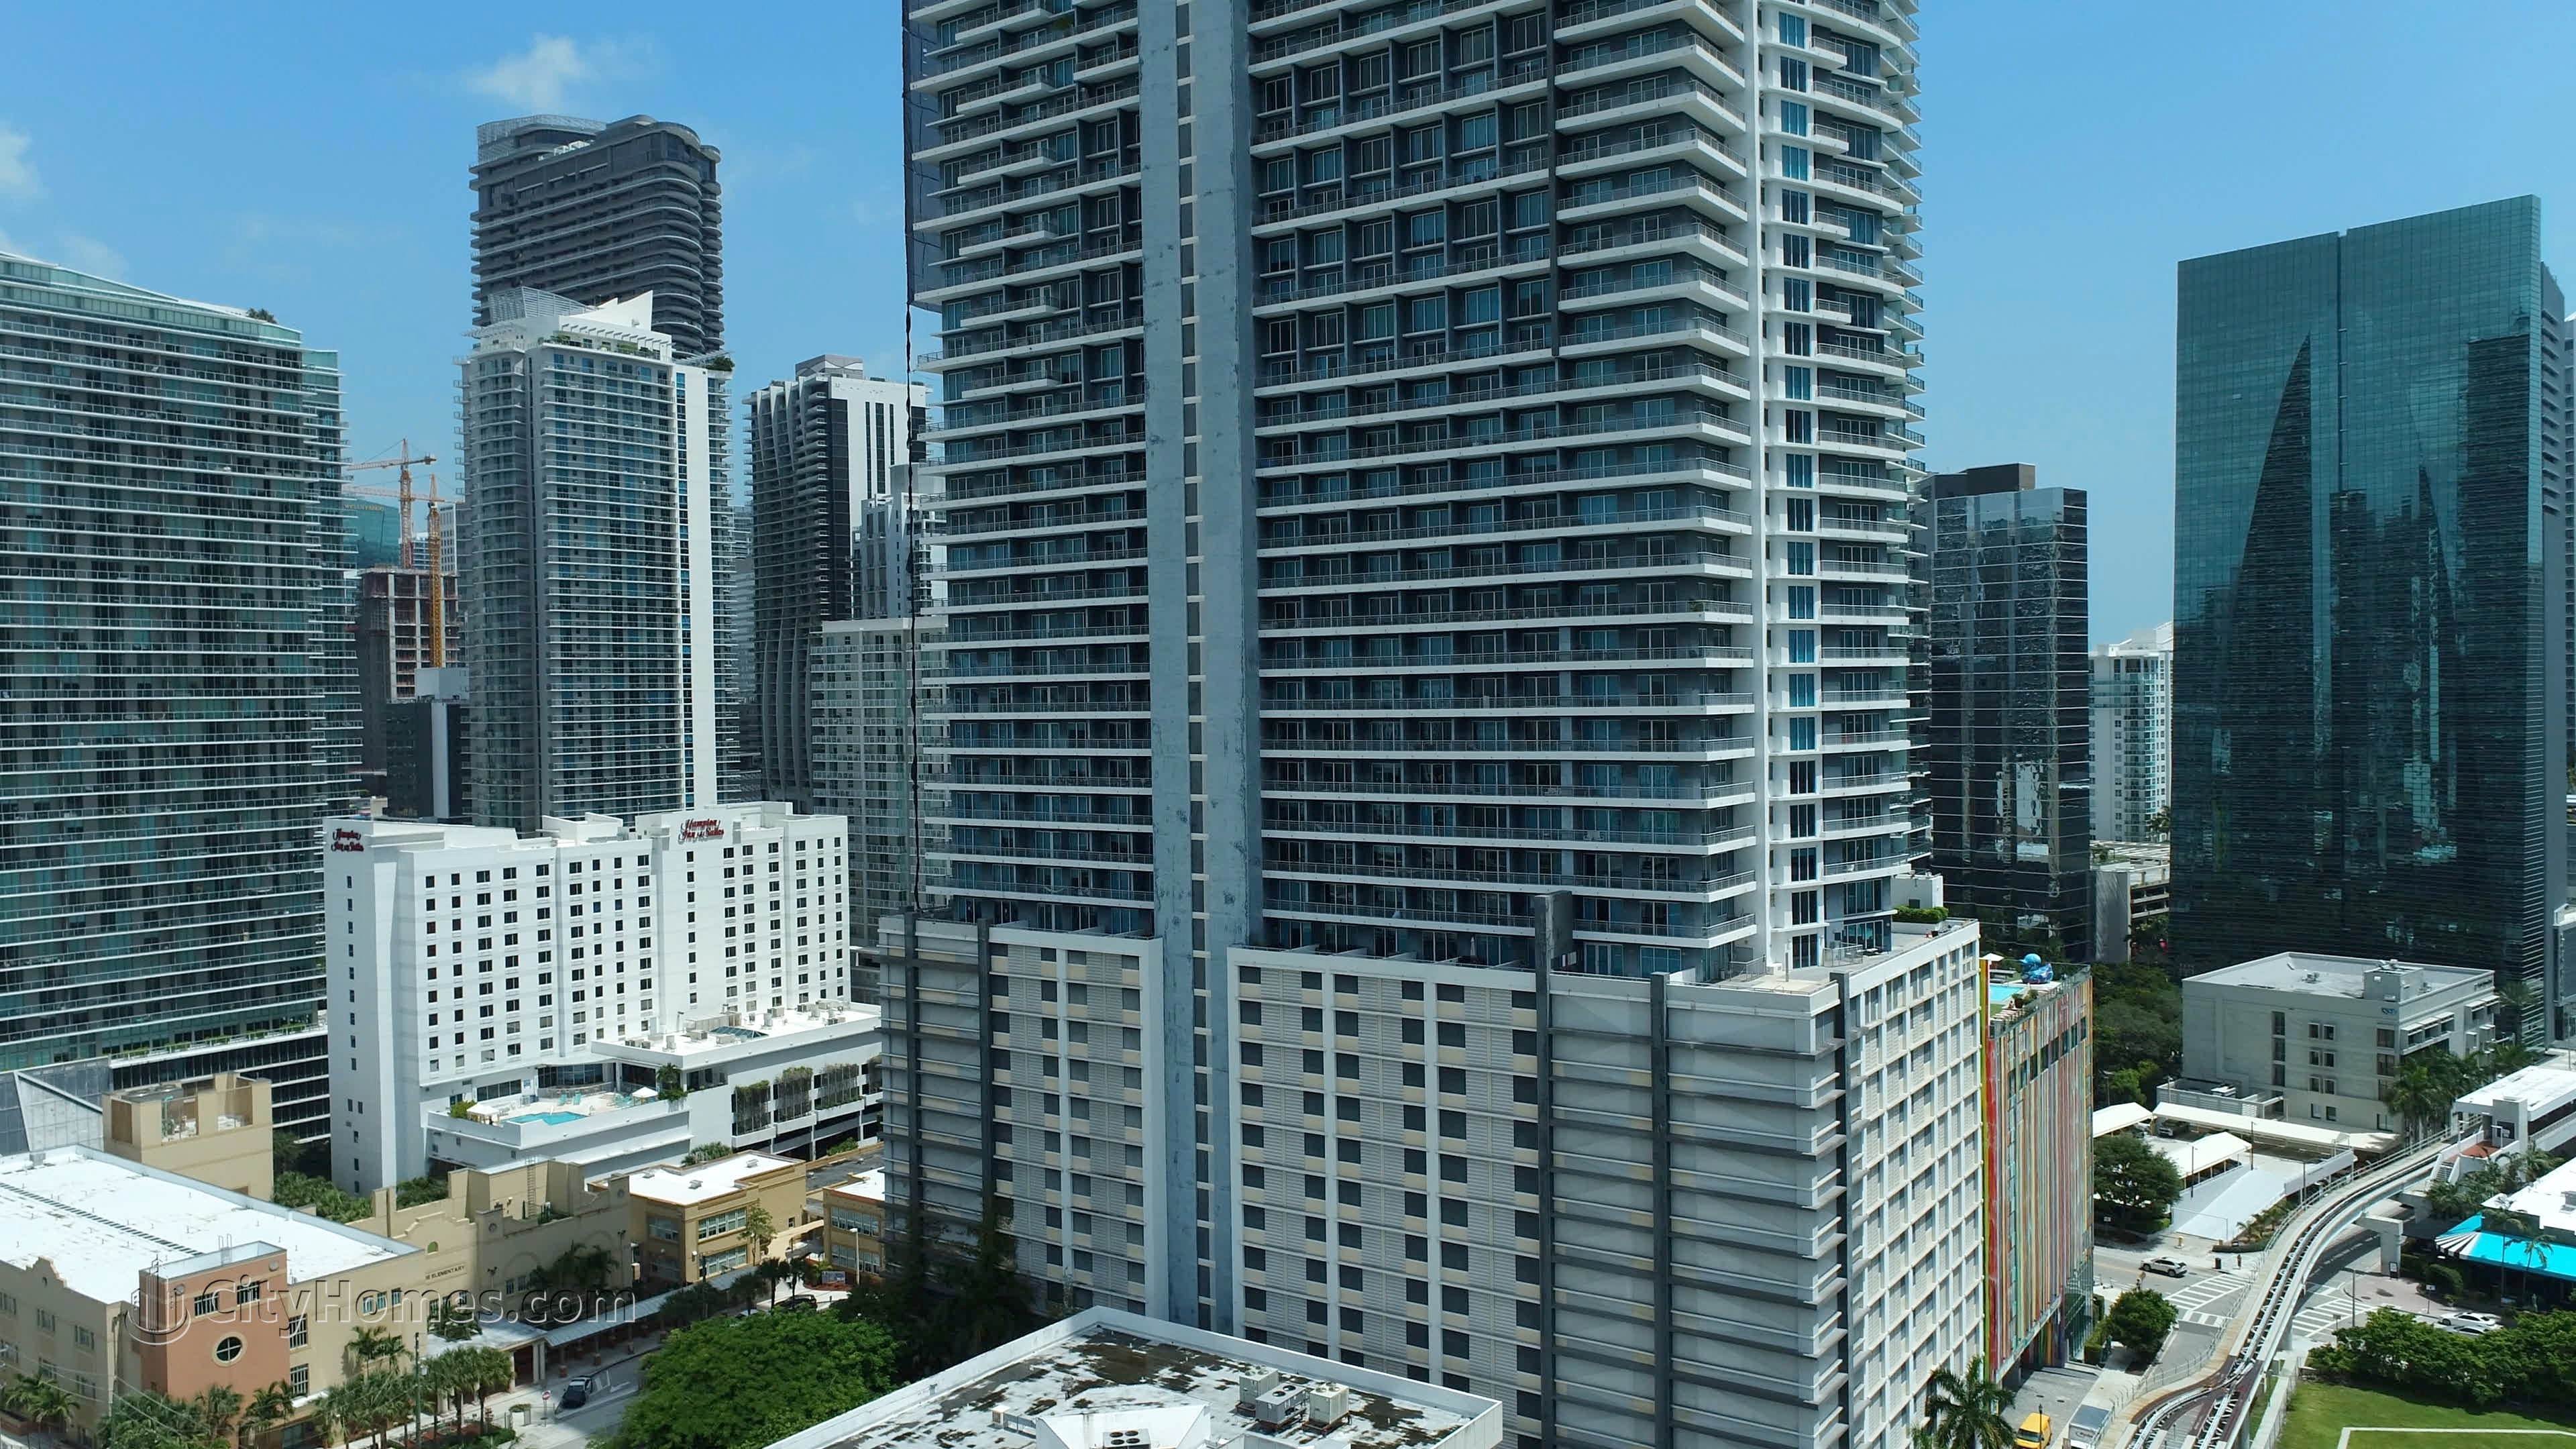 3. Infinity building at 60 SW 13th St, Brickell, Miami, FL 33130